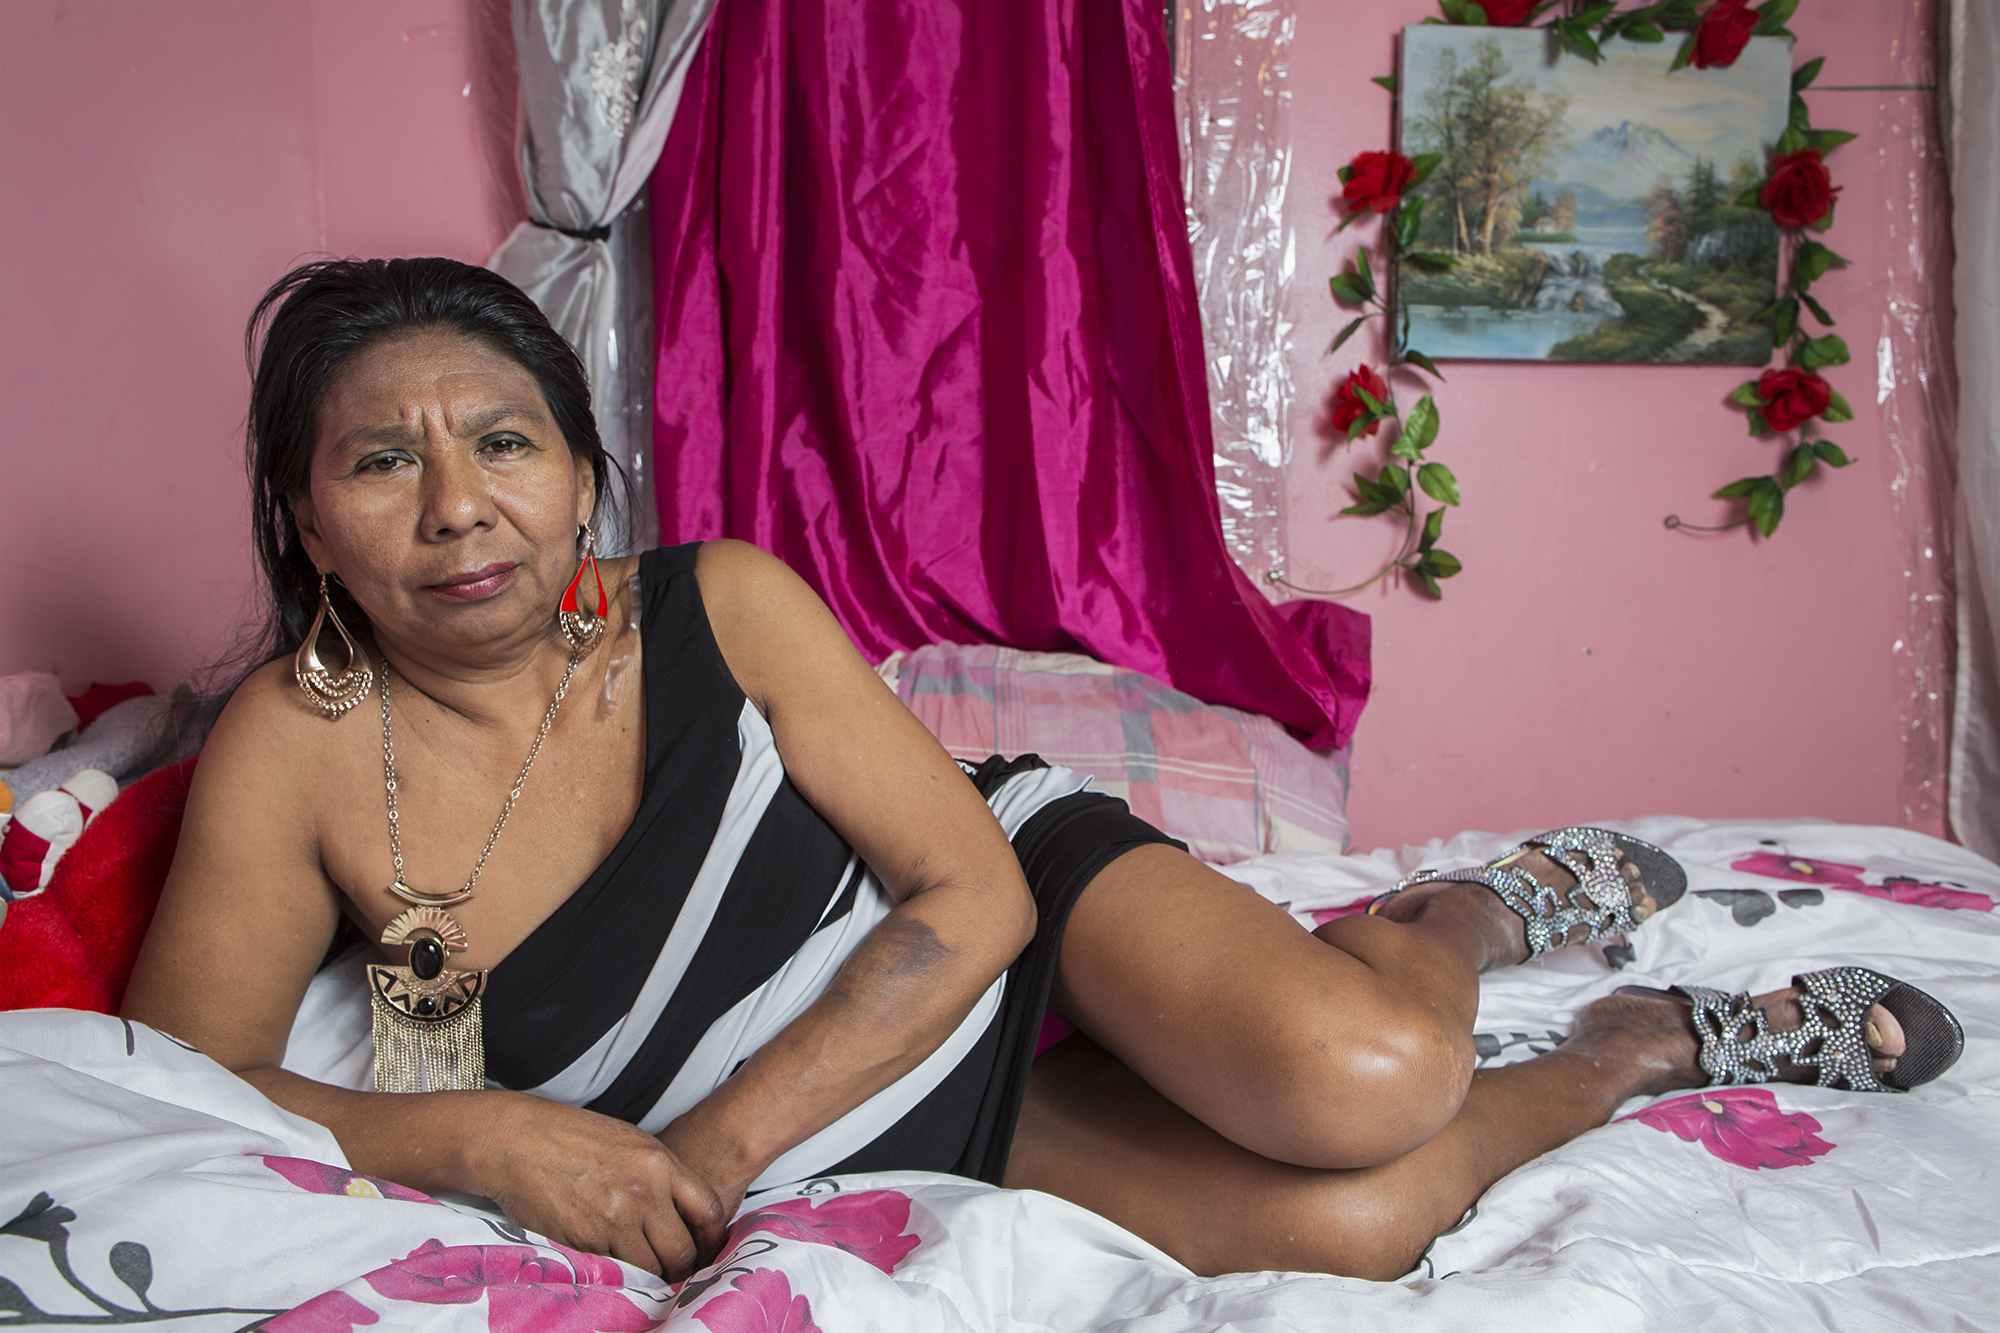  Dionisia Martínez, in her bedroom on 45th Street in Sunset Park, Brooklyn. She is a singer and dancer of Mexican folklore. Born in Atencingo, Puebla, she has been based in New York since 2002. Since then she has worked washing dishes in restaurants,